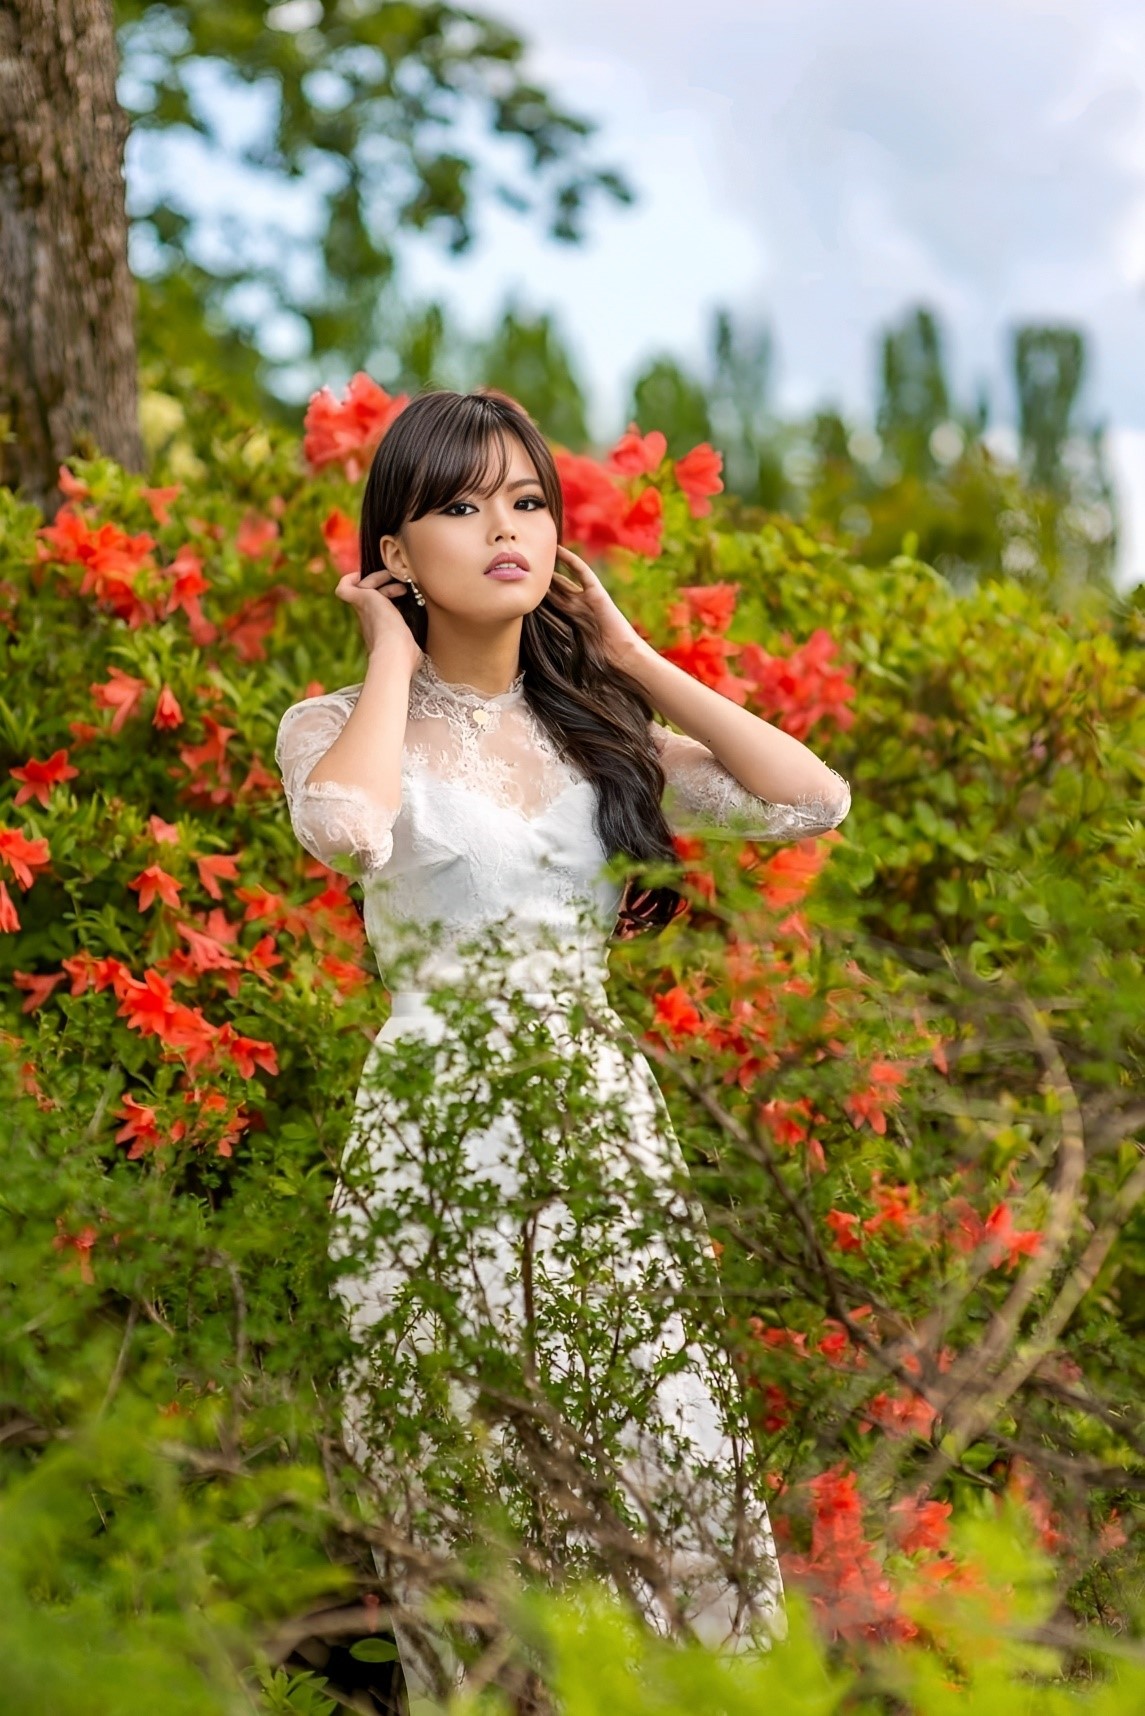 ‘First Kiss of Spring’: Musician and Recording Artist Rosie Minako Breaks Barrier with New Music